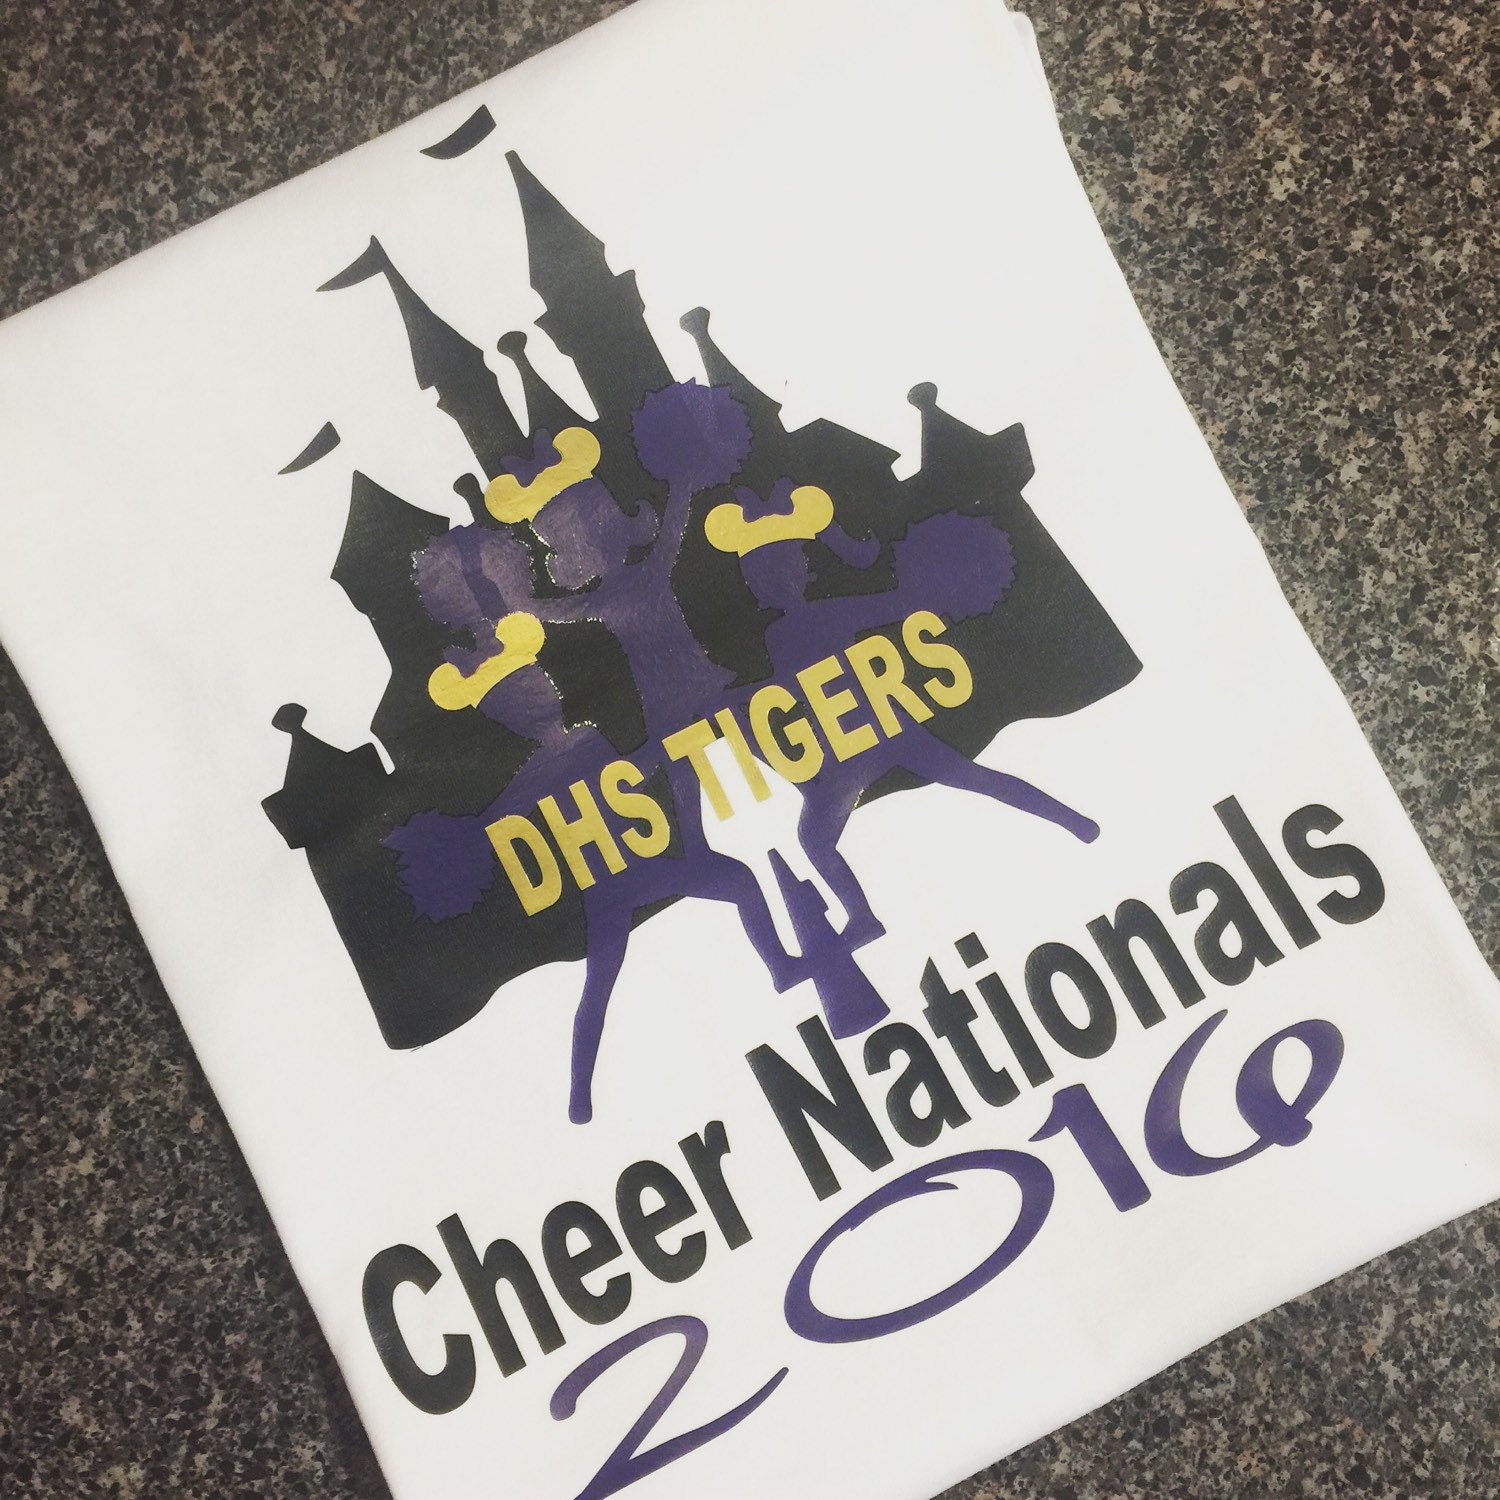 Disney Cheer Nationals Team Shirts by OHMYPOSHBOUTIQUE on Etsy